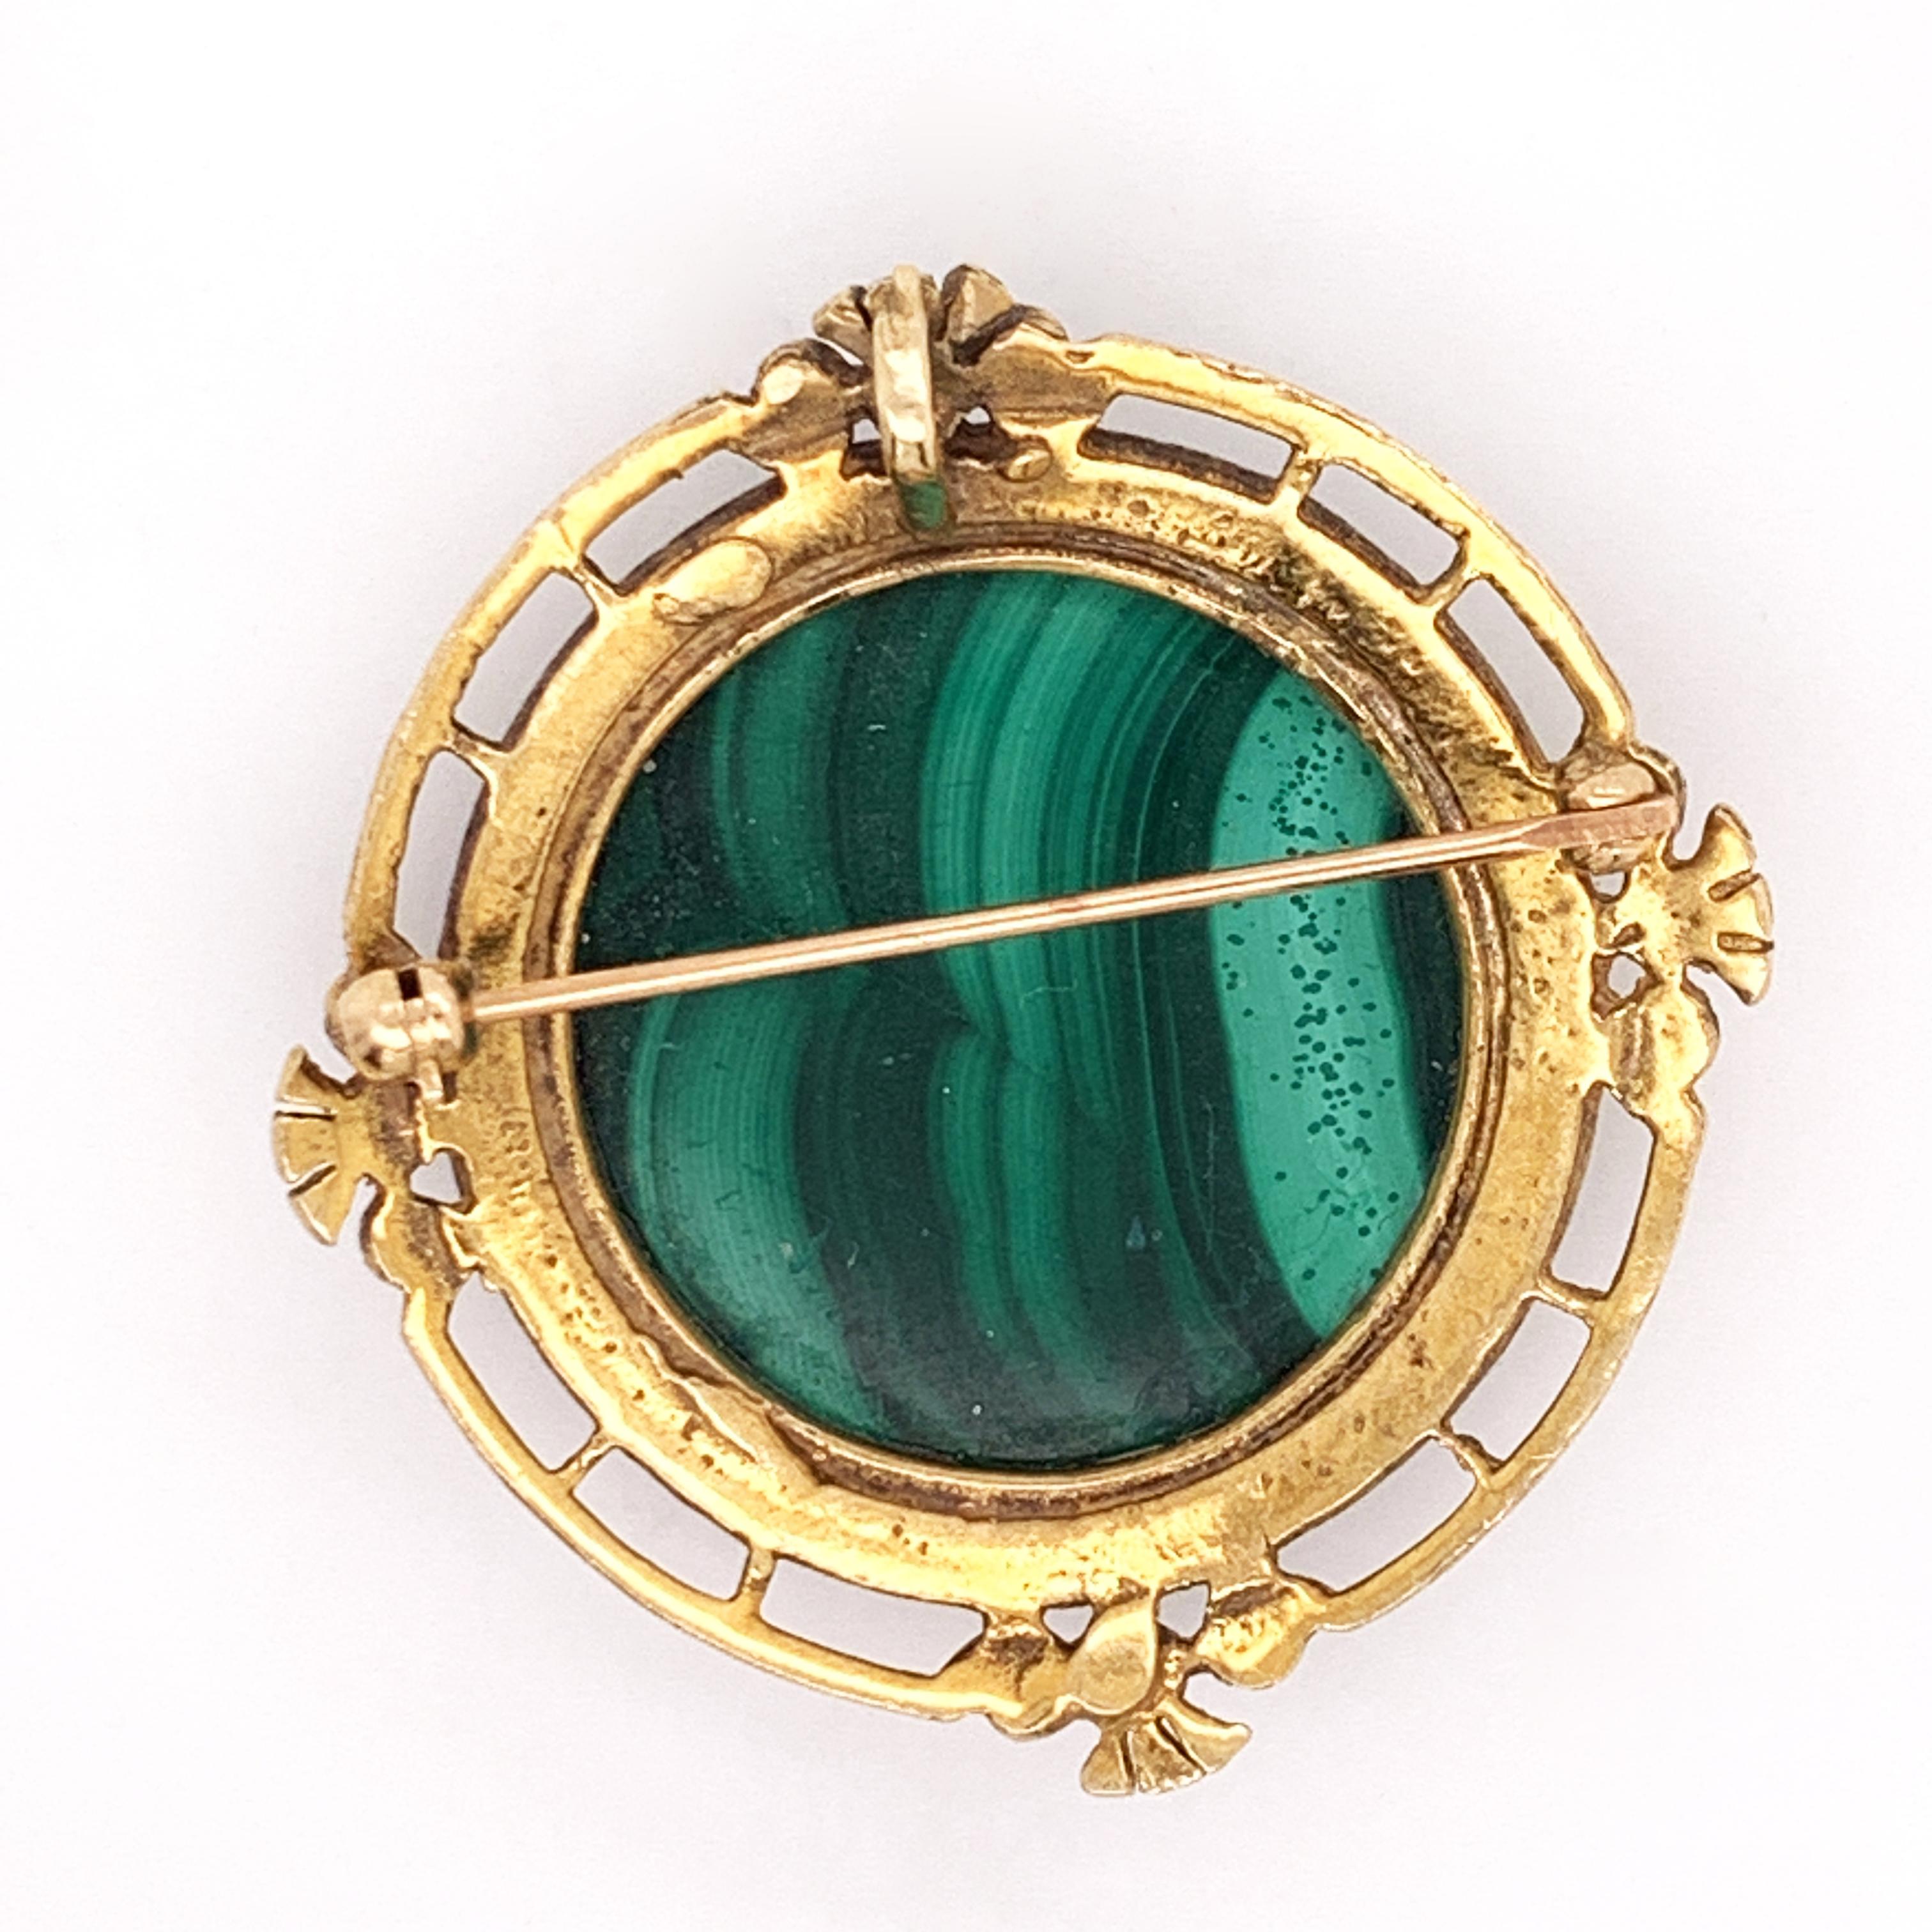 Round Cut Natural Malachite Stone Brooch Framed in 14 Karat Yellow Gold With Accent Pearls